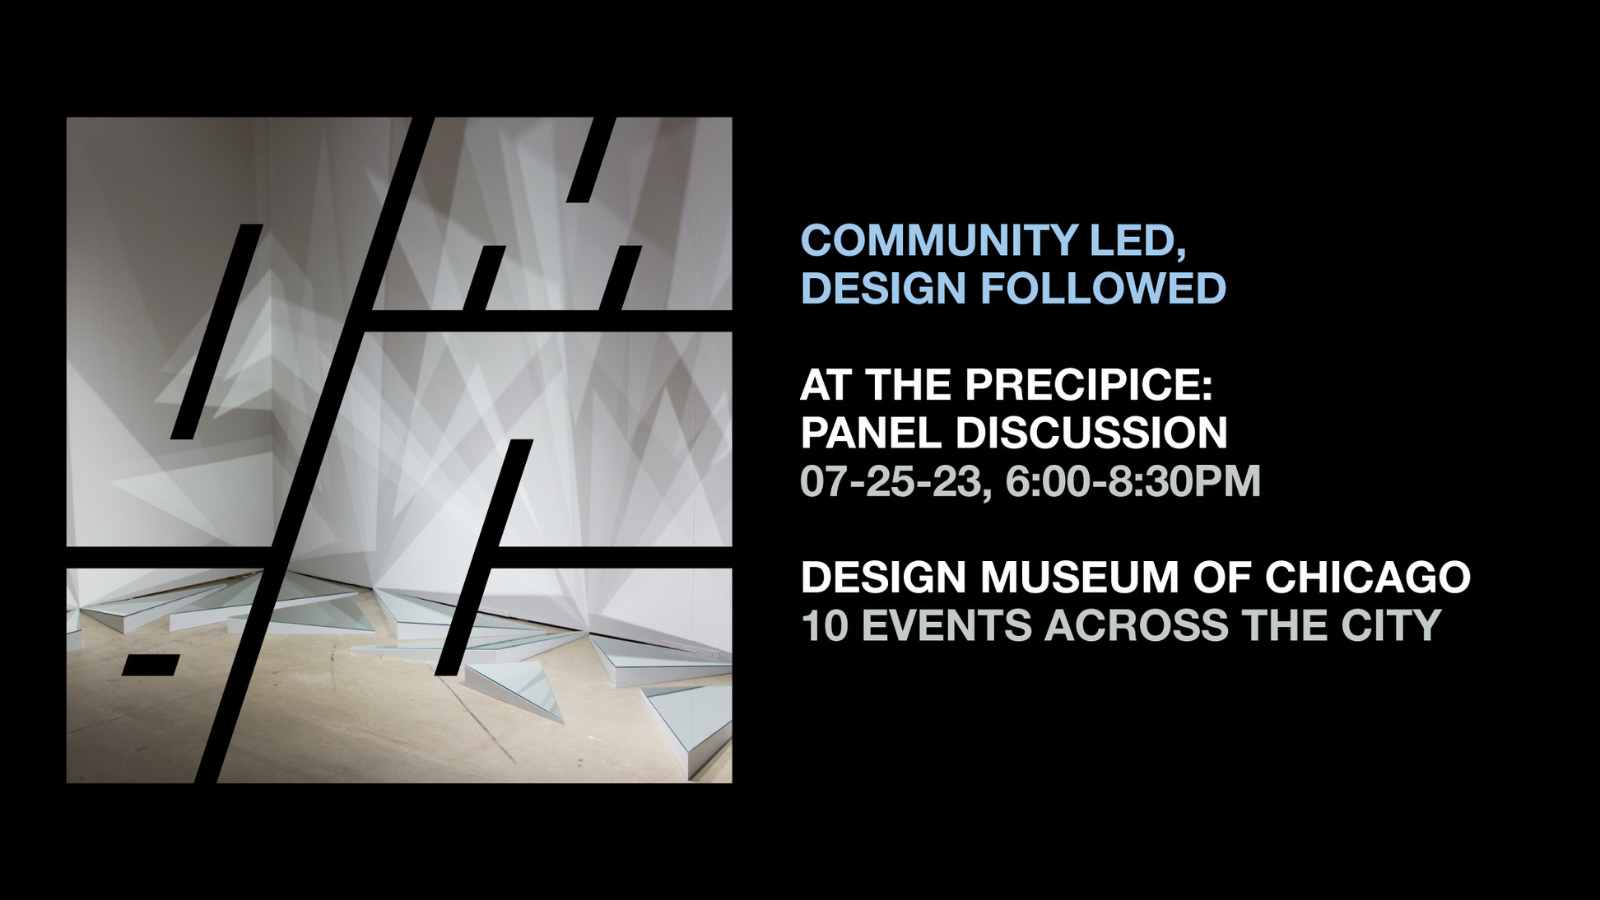 Artistic logo next to text reading "Community Led, Design Followed / At the precipice: Panel discussion 07-25-23, 6:00-8:30pm, Design Museum of Chicago, 10 events across the country"